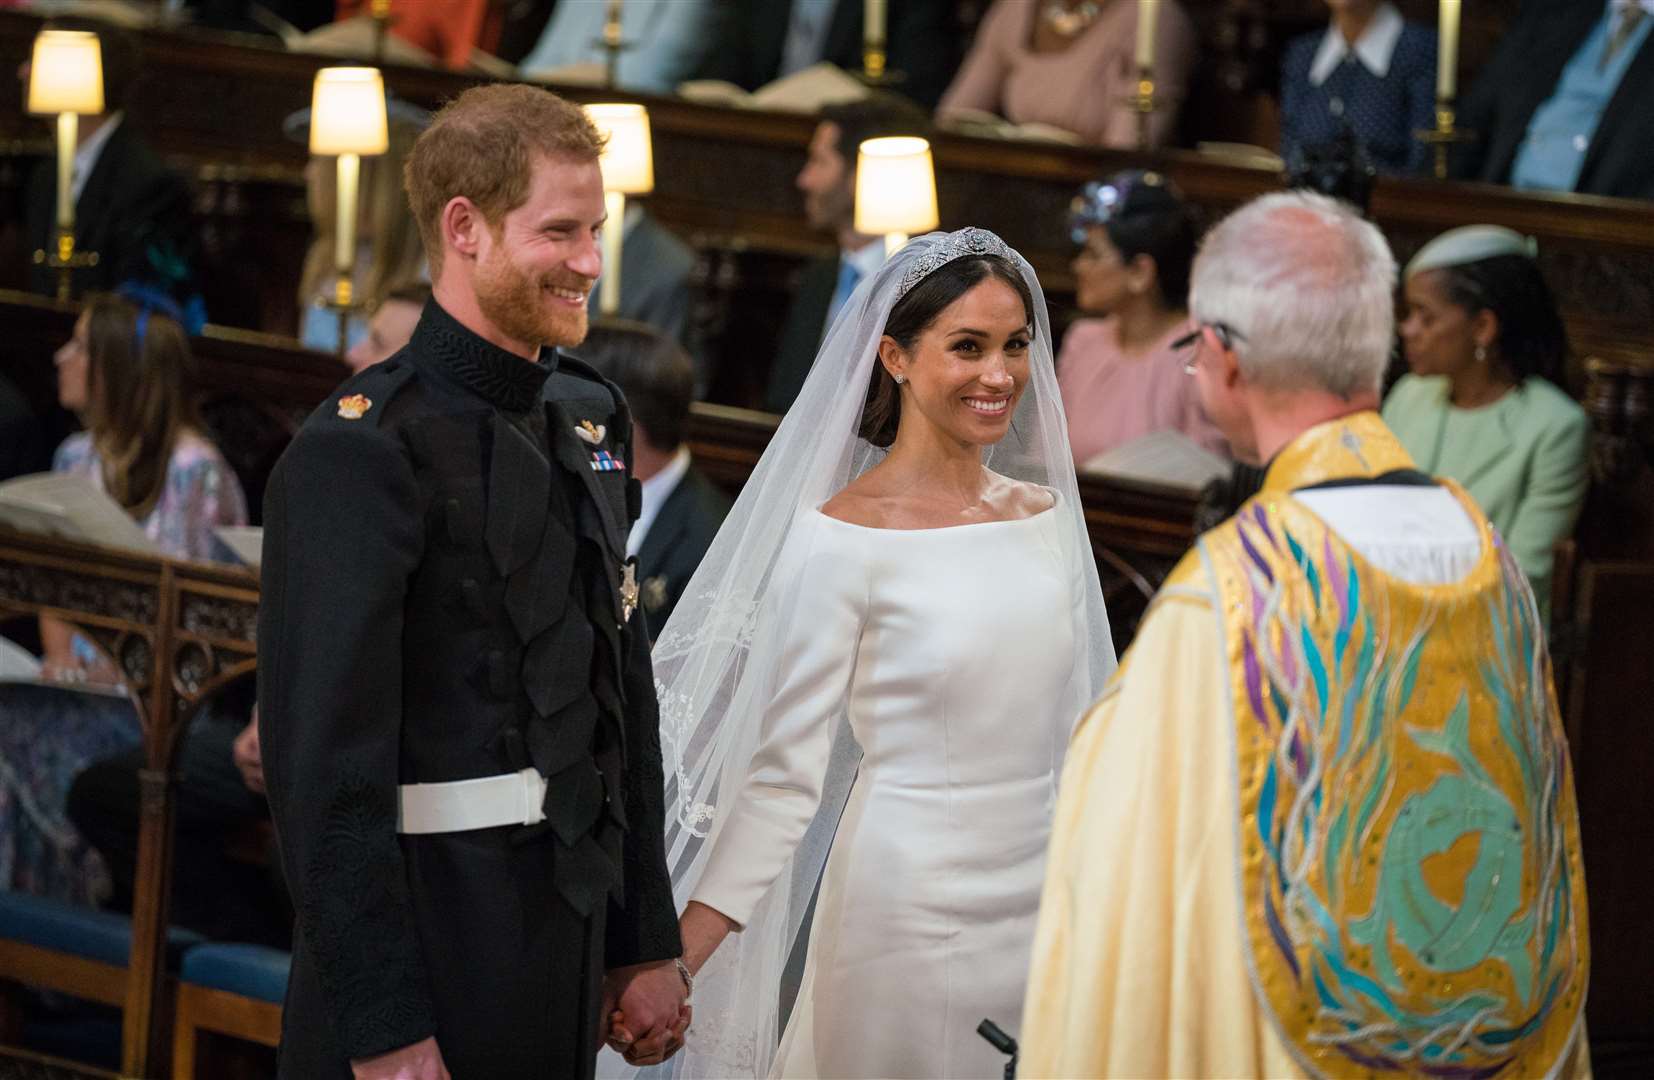 Harry and Meghan on their wedding day (Dominic Lipinski/PA)